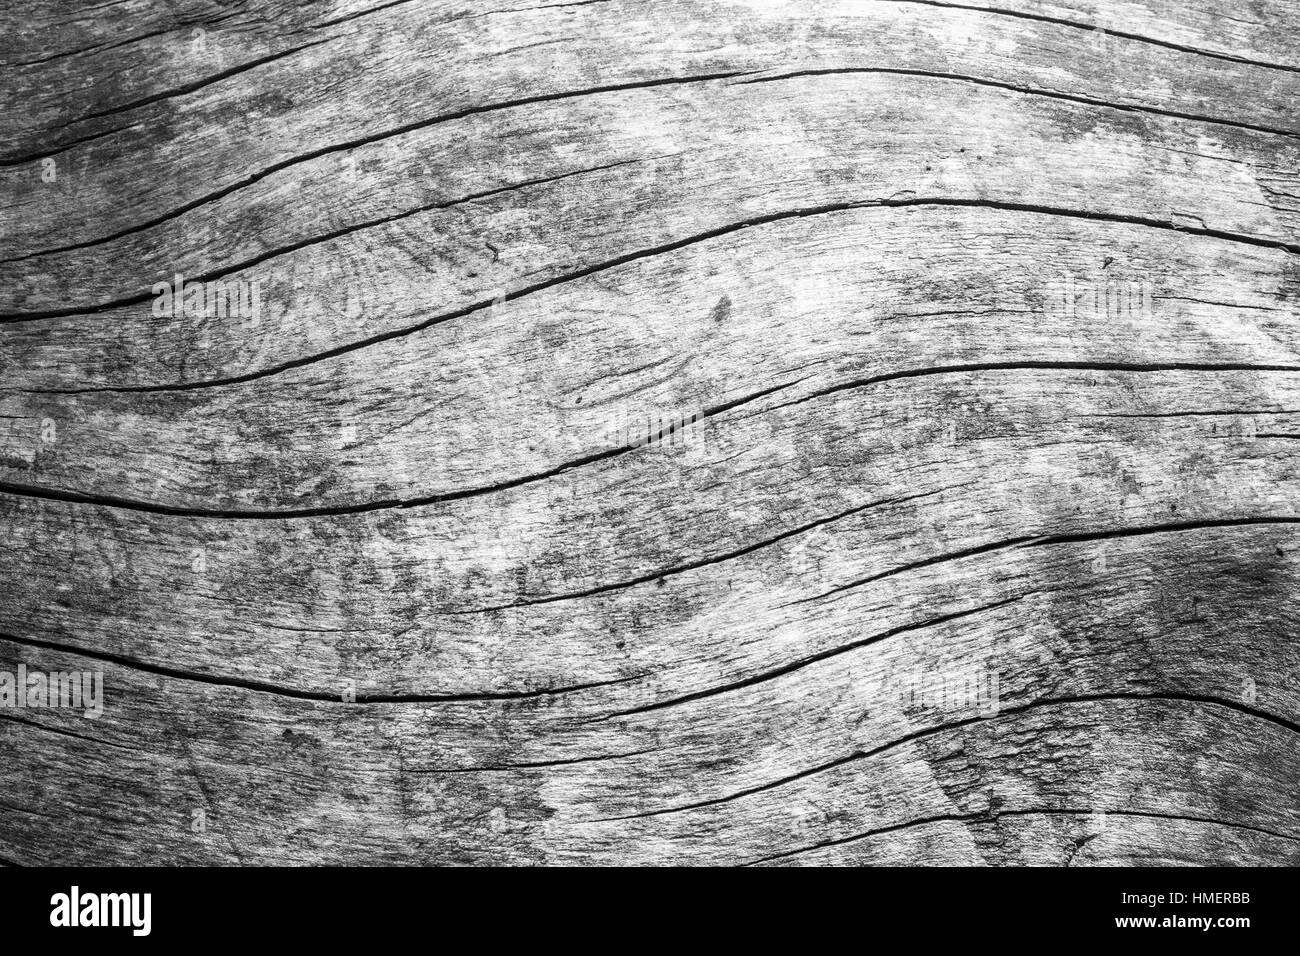 natural wood grain texture in black and white Stock Photo